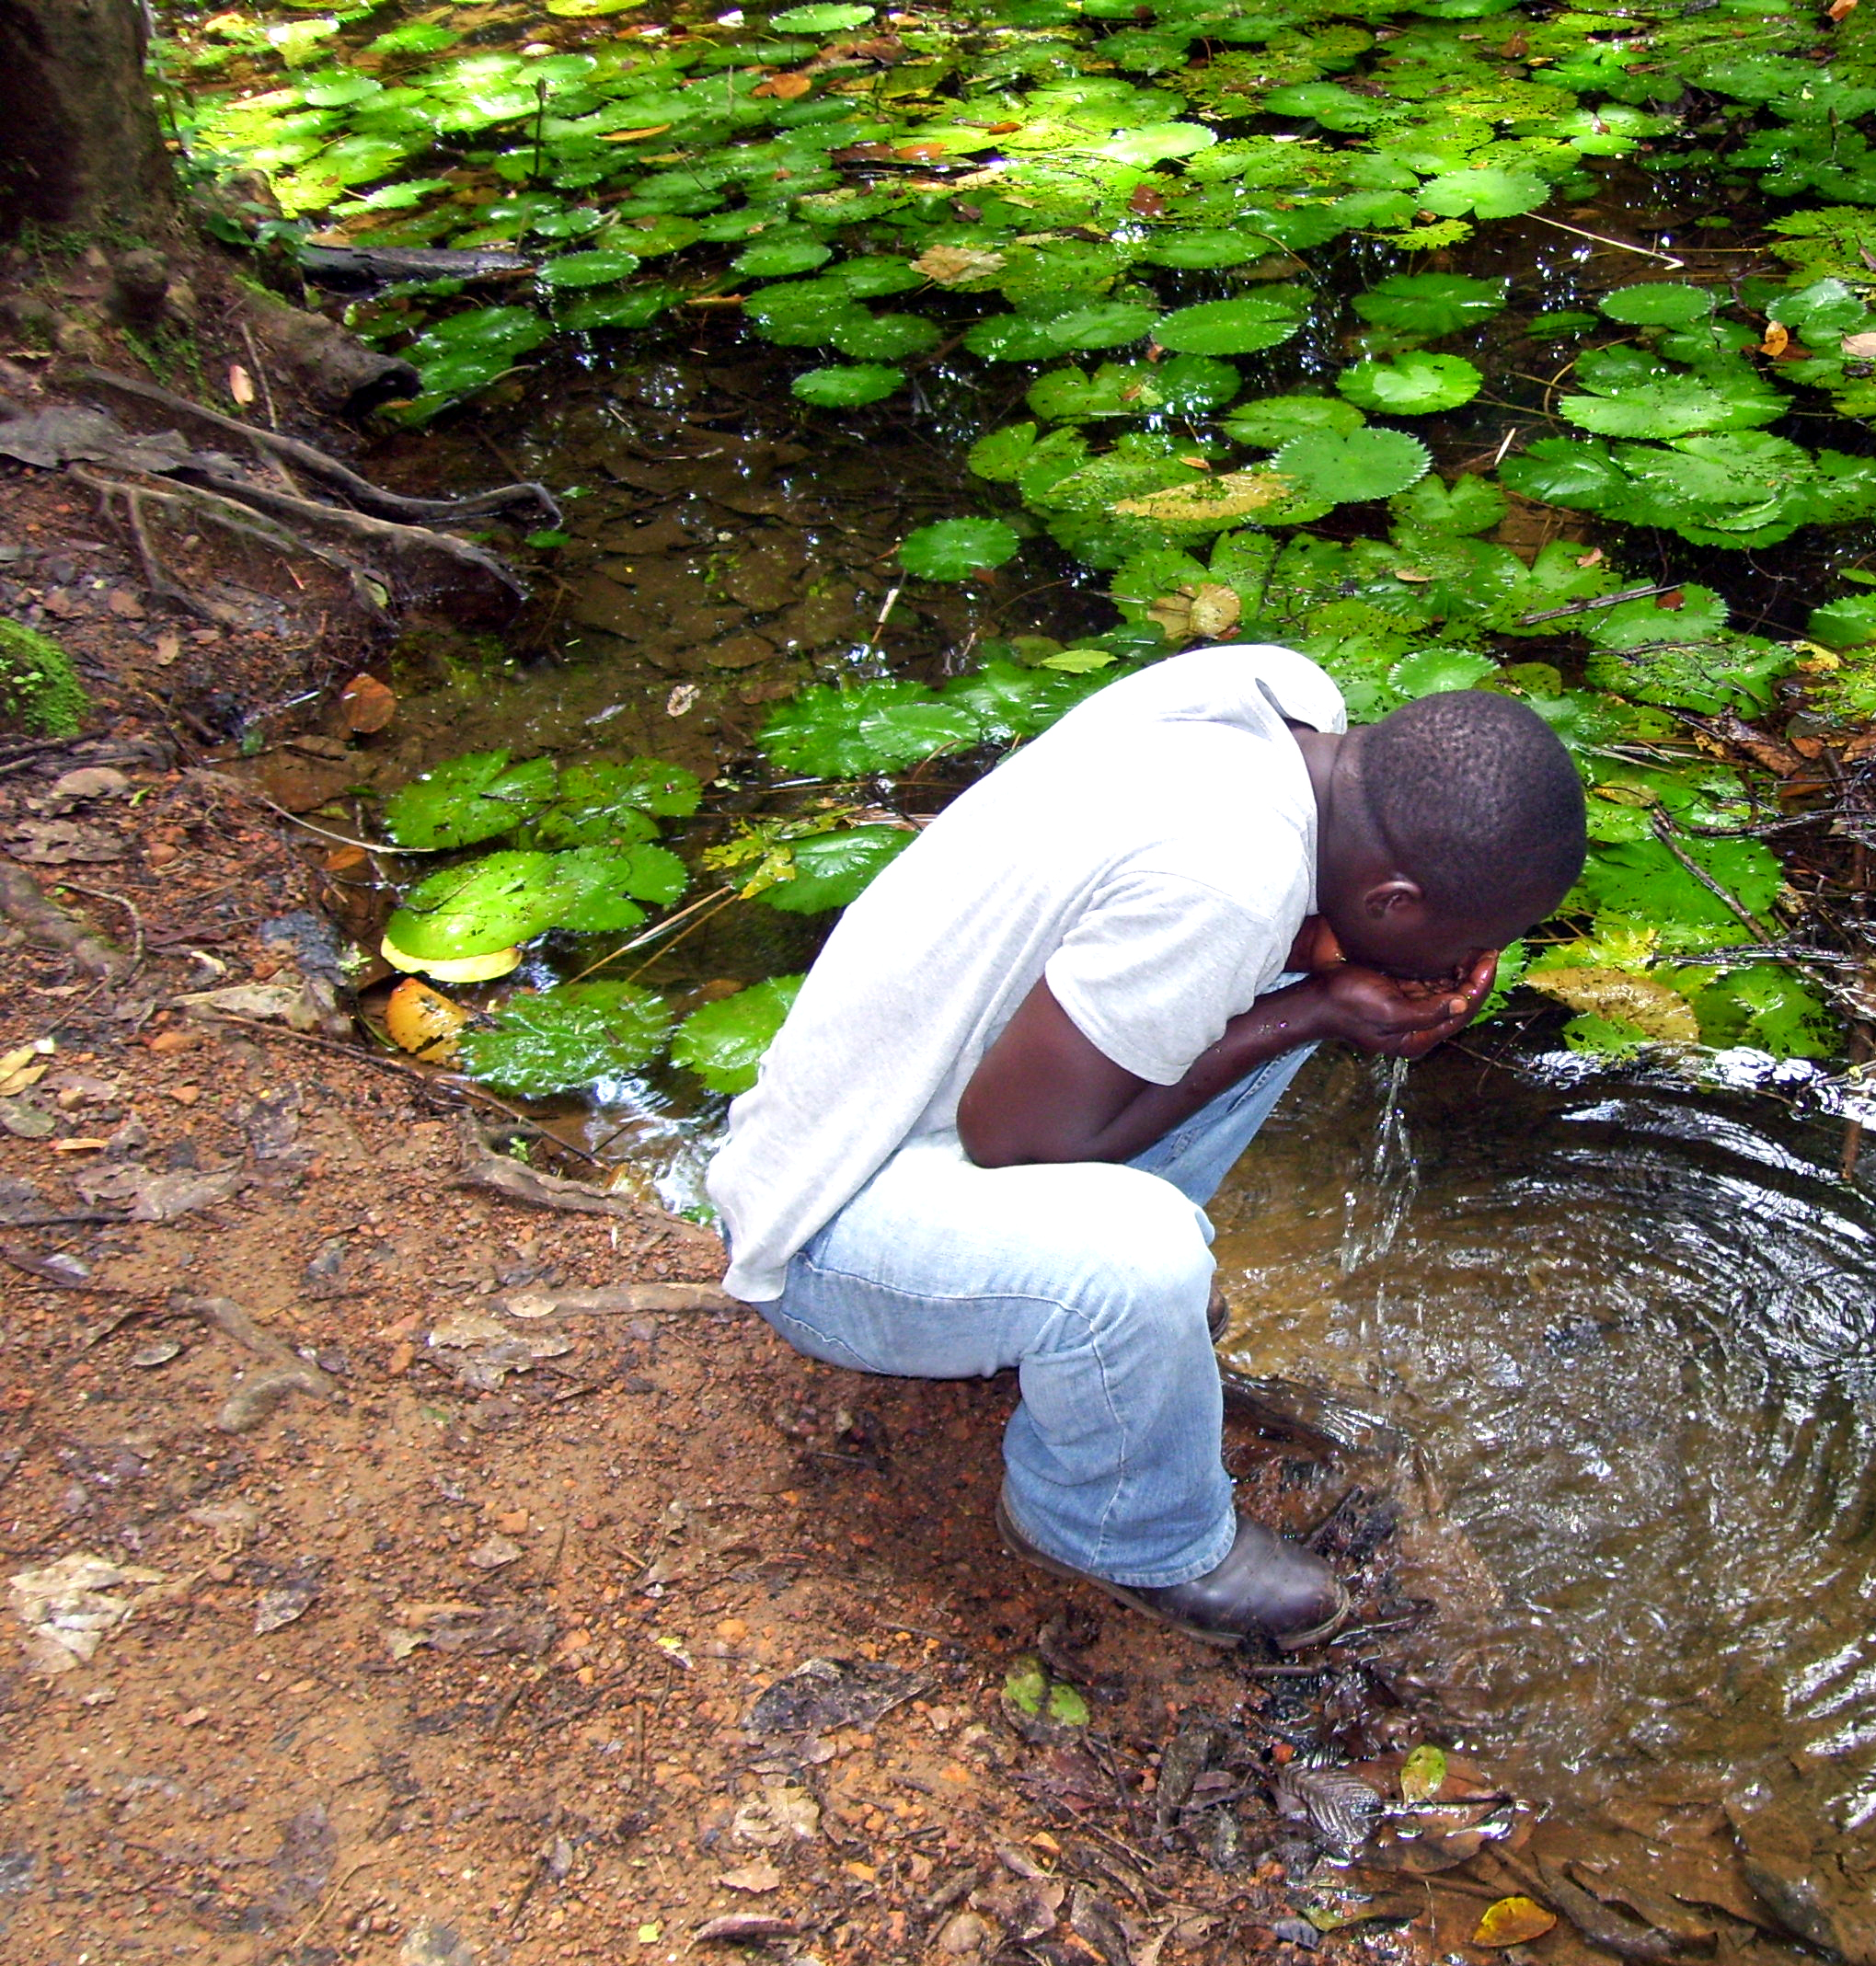 Drinking from Old Water Source